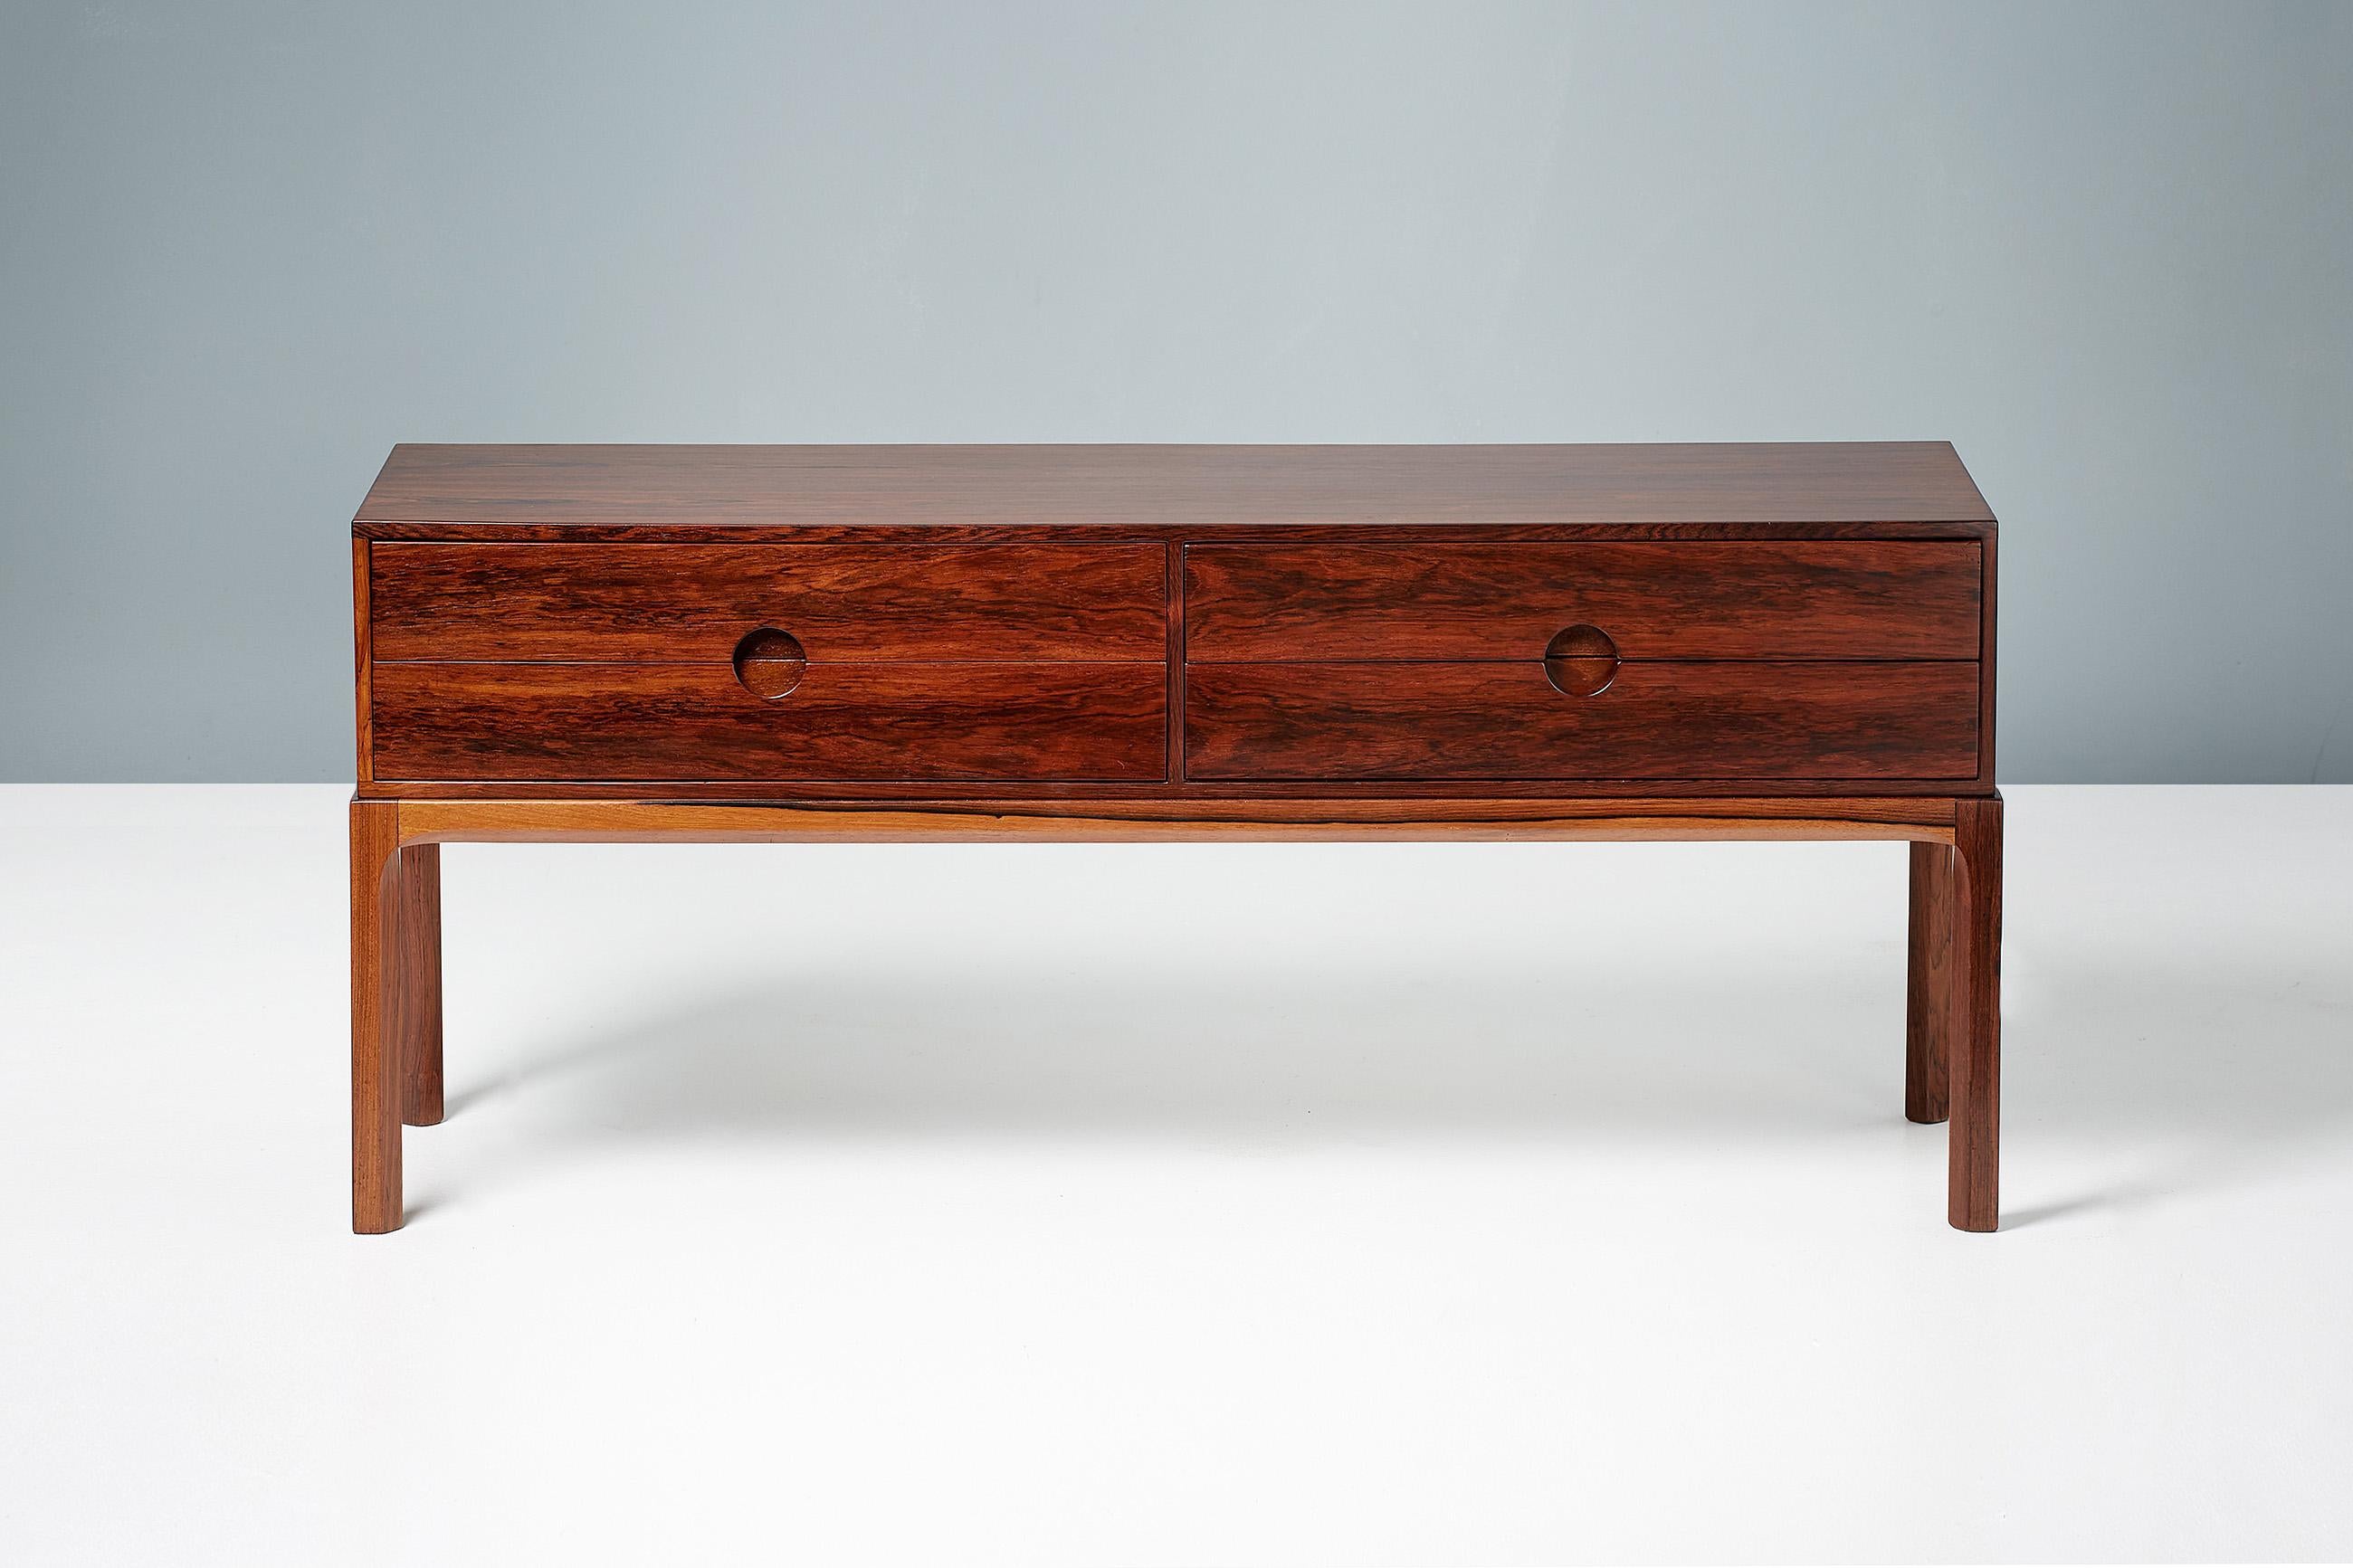 Kai Kristiansen

Model 384 chest, c1960

Low, 4-drawer chest made from highly figured rosewood, produced by Aksel Kjersgaard in Odder, Denmark, c1960. Features Kristiansen’s trademark circular drawer pulls. 

Measures: H 52 cm 
W 118 cm 
D